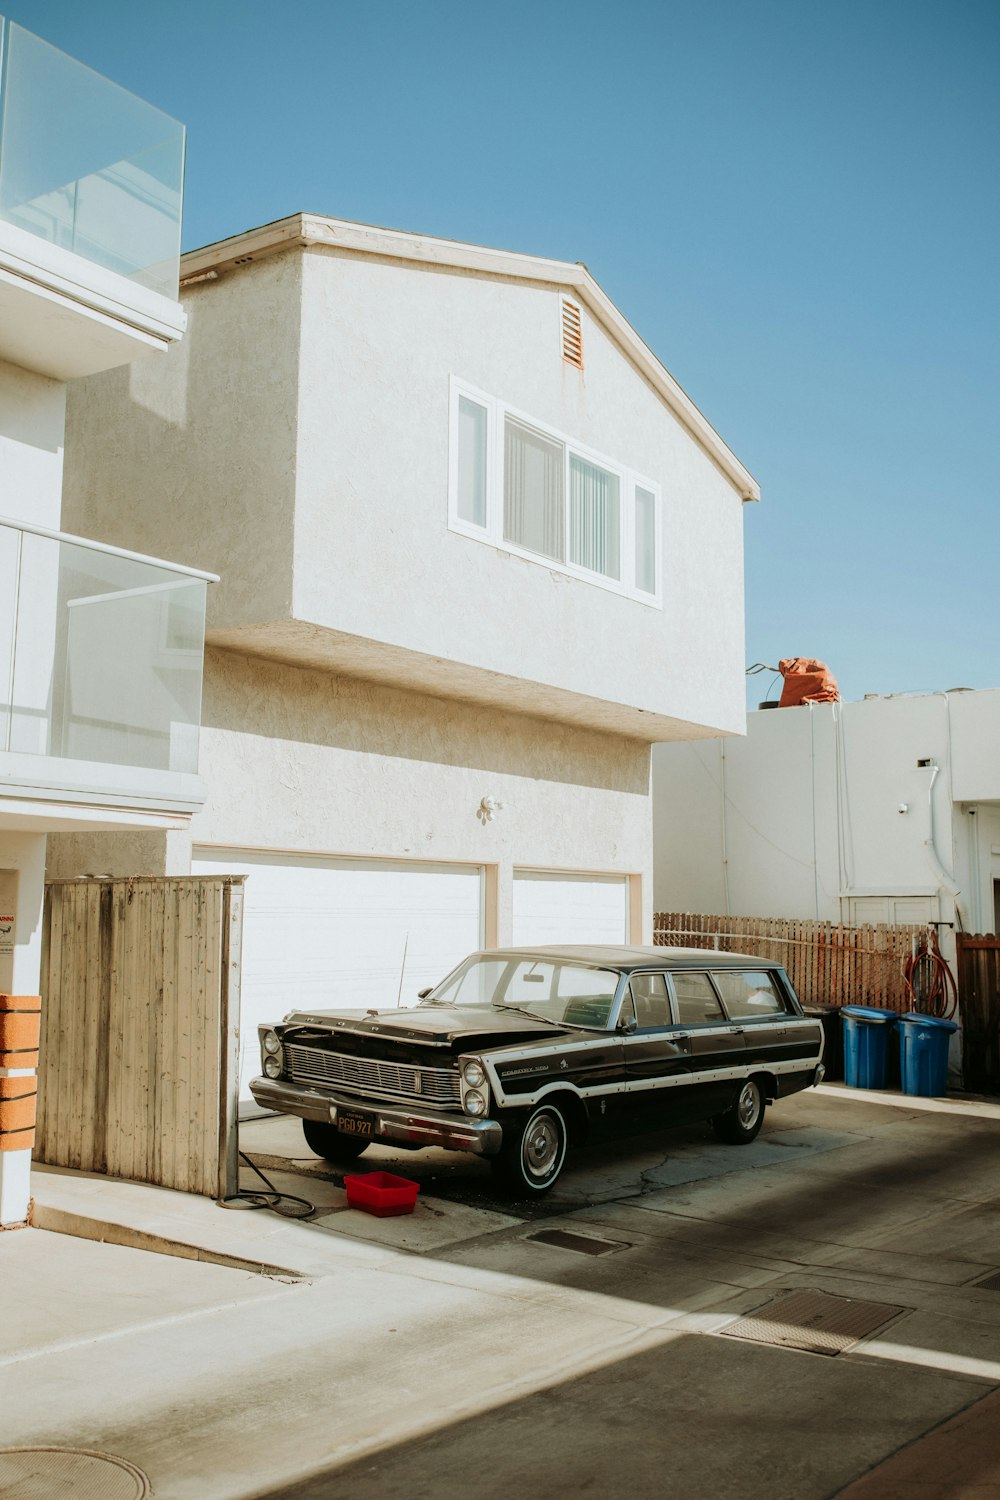 a black station wagon parked in front of a house